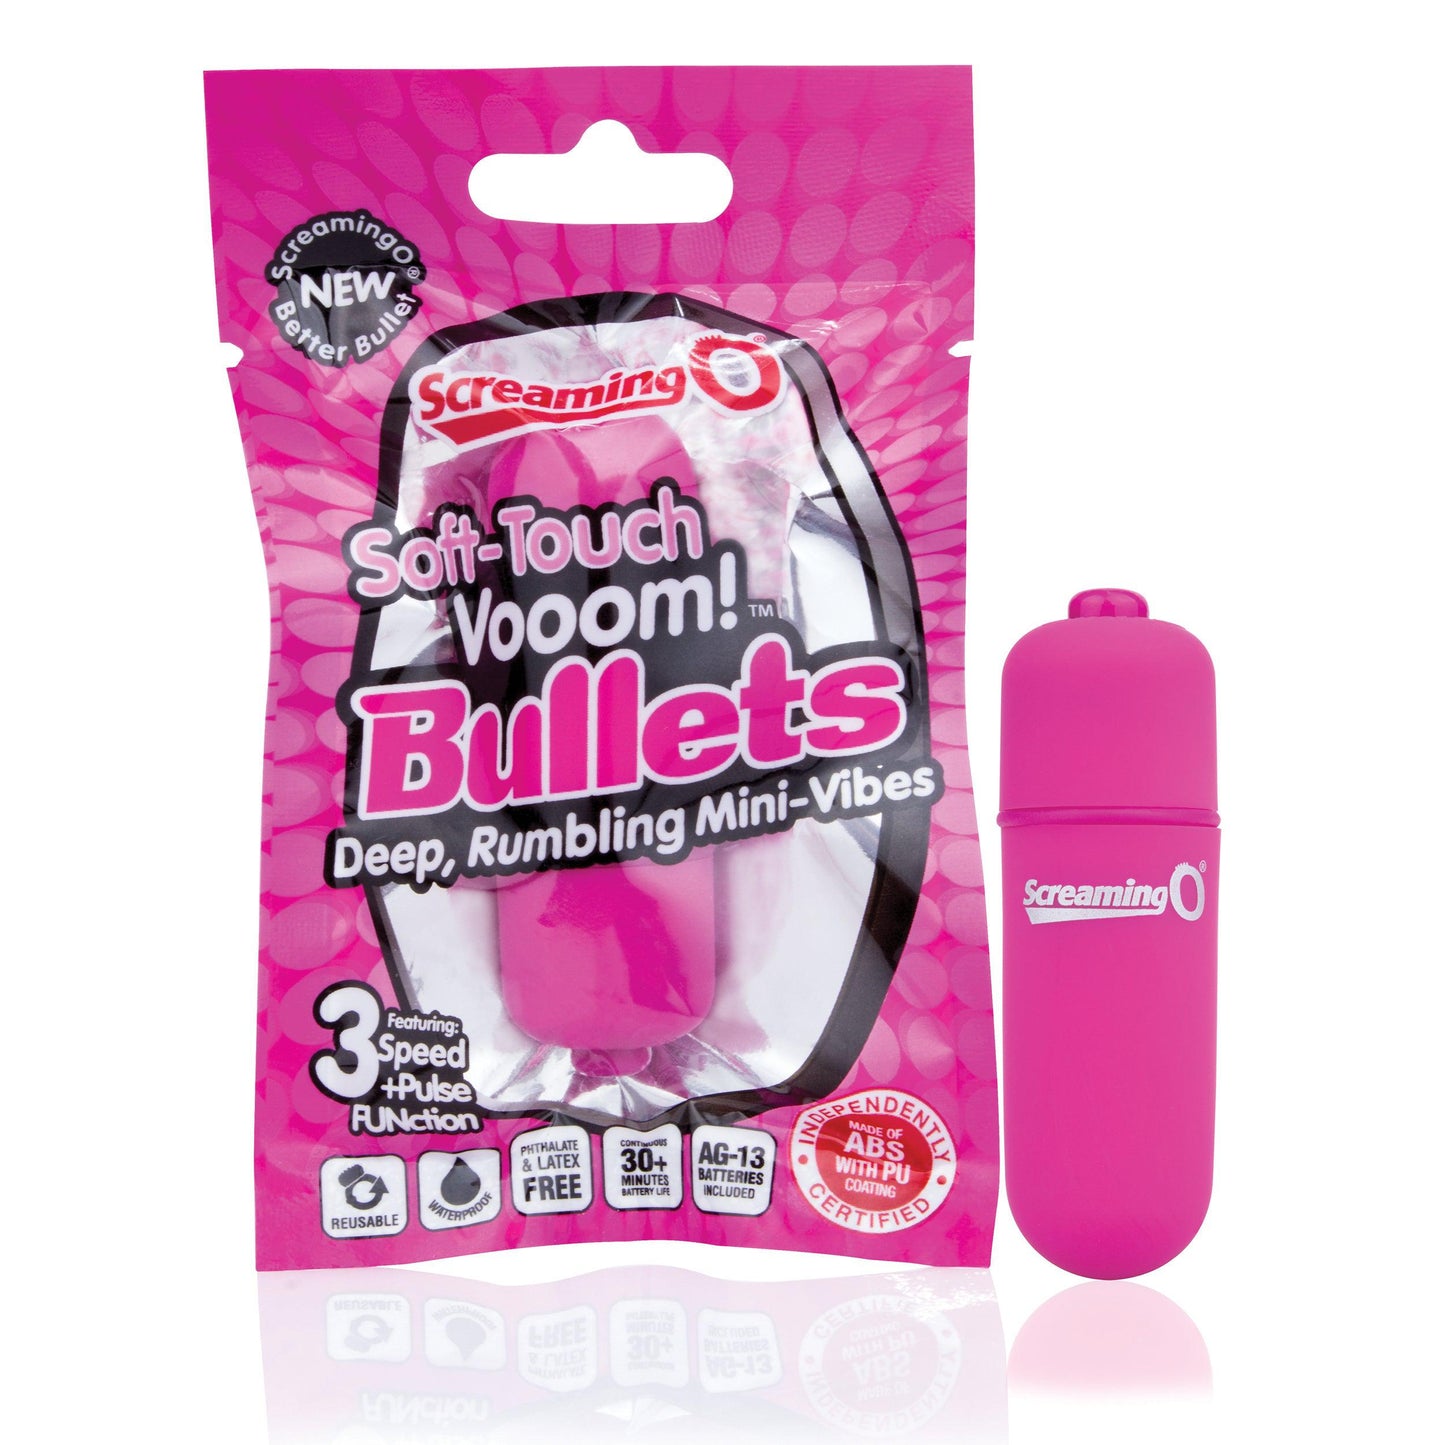 Soft-Touch Vooom! Bullets - Pink